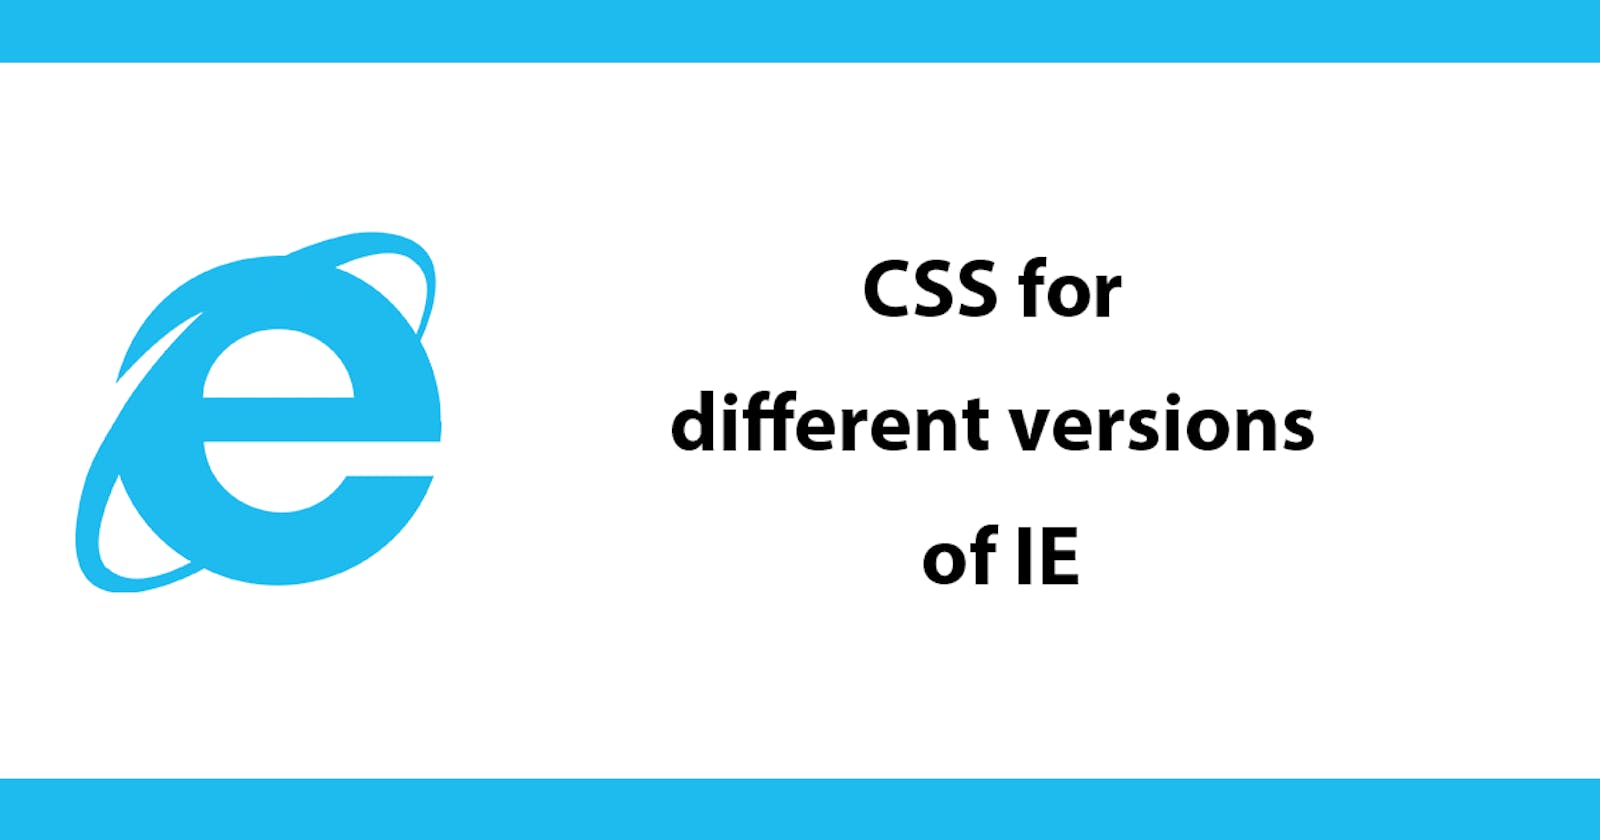 CSS for different versions of IE